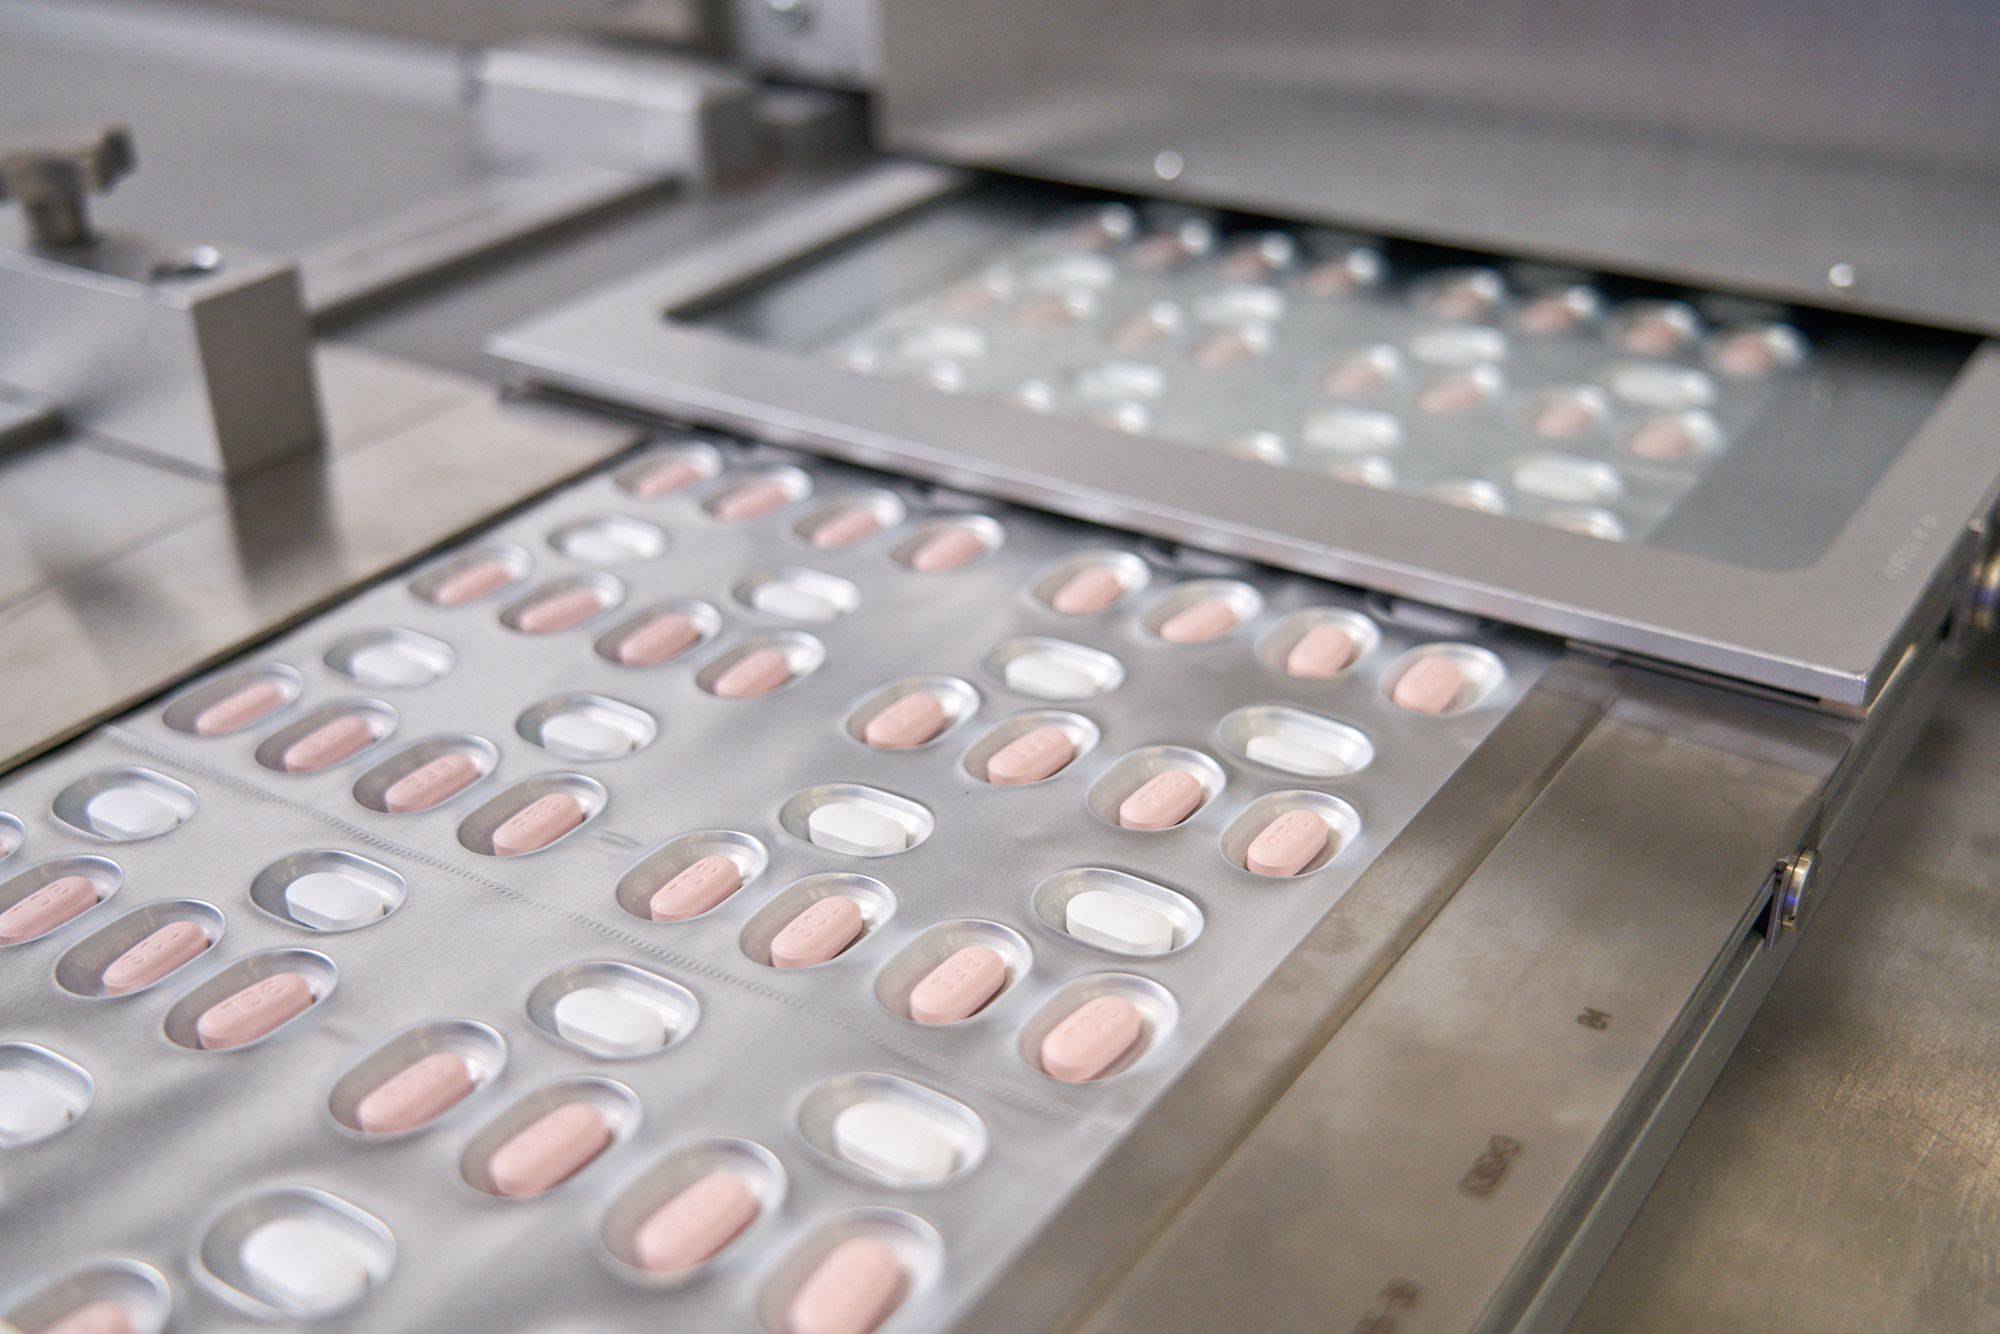 Pfizer's experimental COVID-19 antiviral pills are produced at a laboratory in Freiburg, Germany. | PFIZER / VIA AFP-JIJI